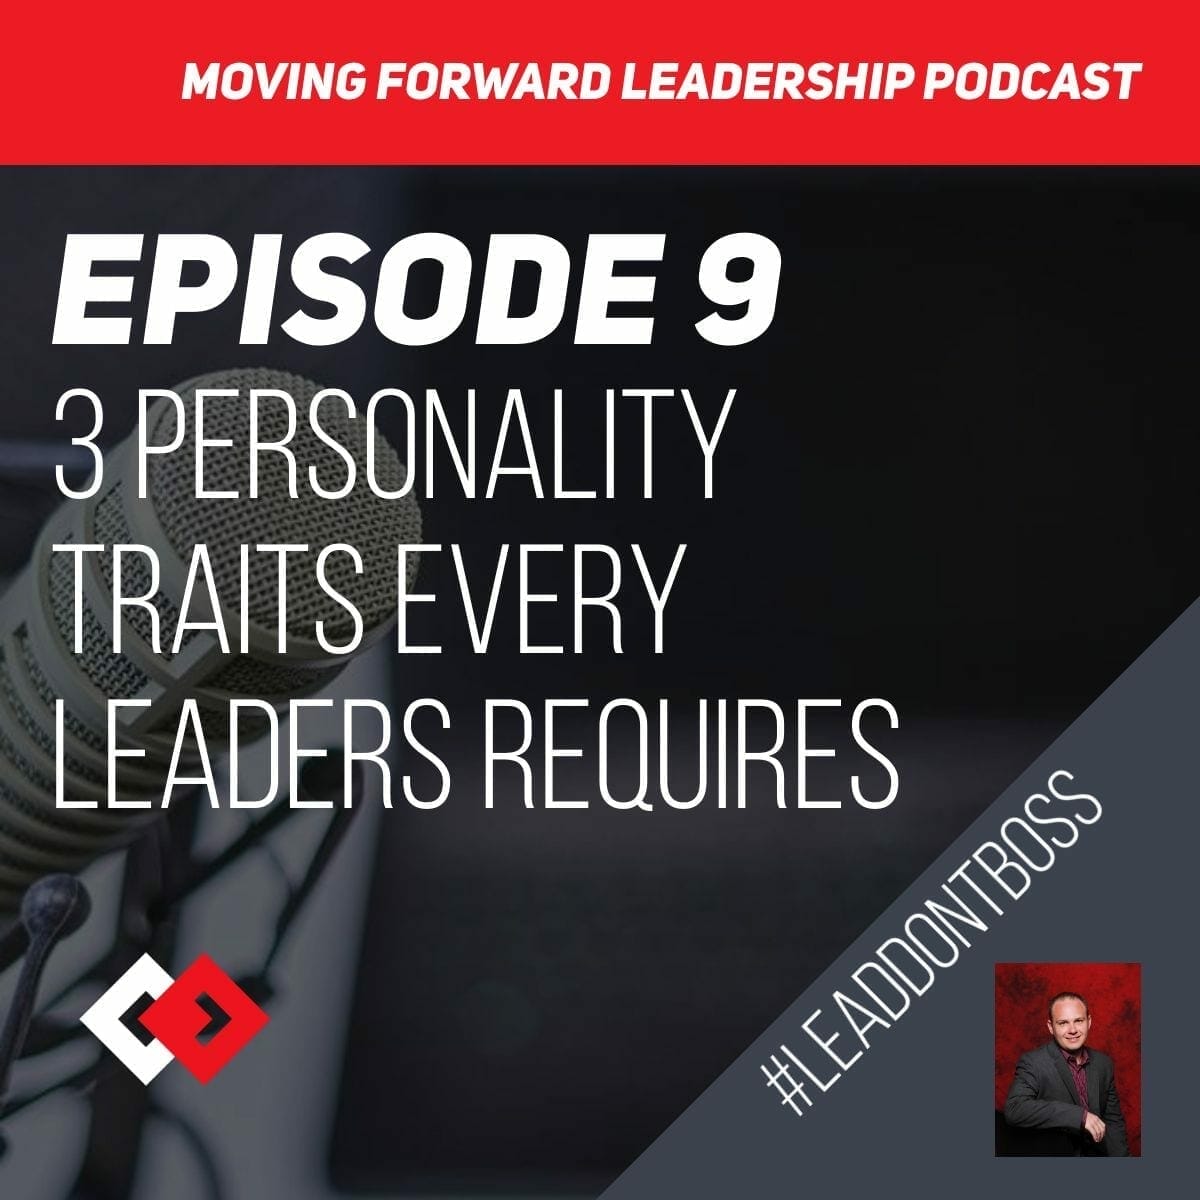 3 Personality Traits Every Leaders Requires | Episode 9